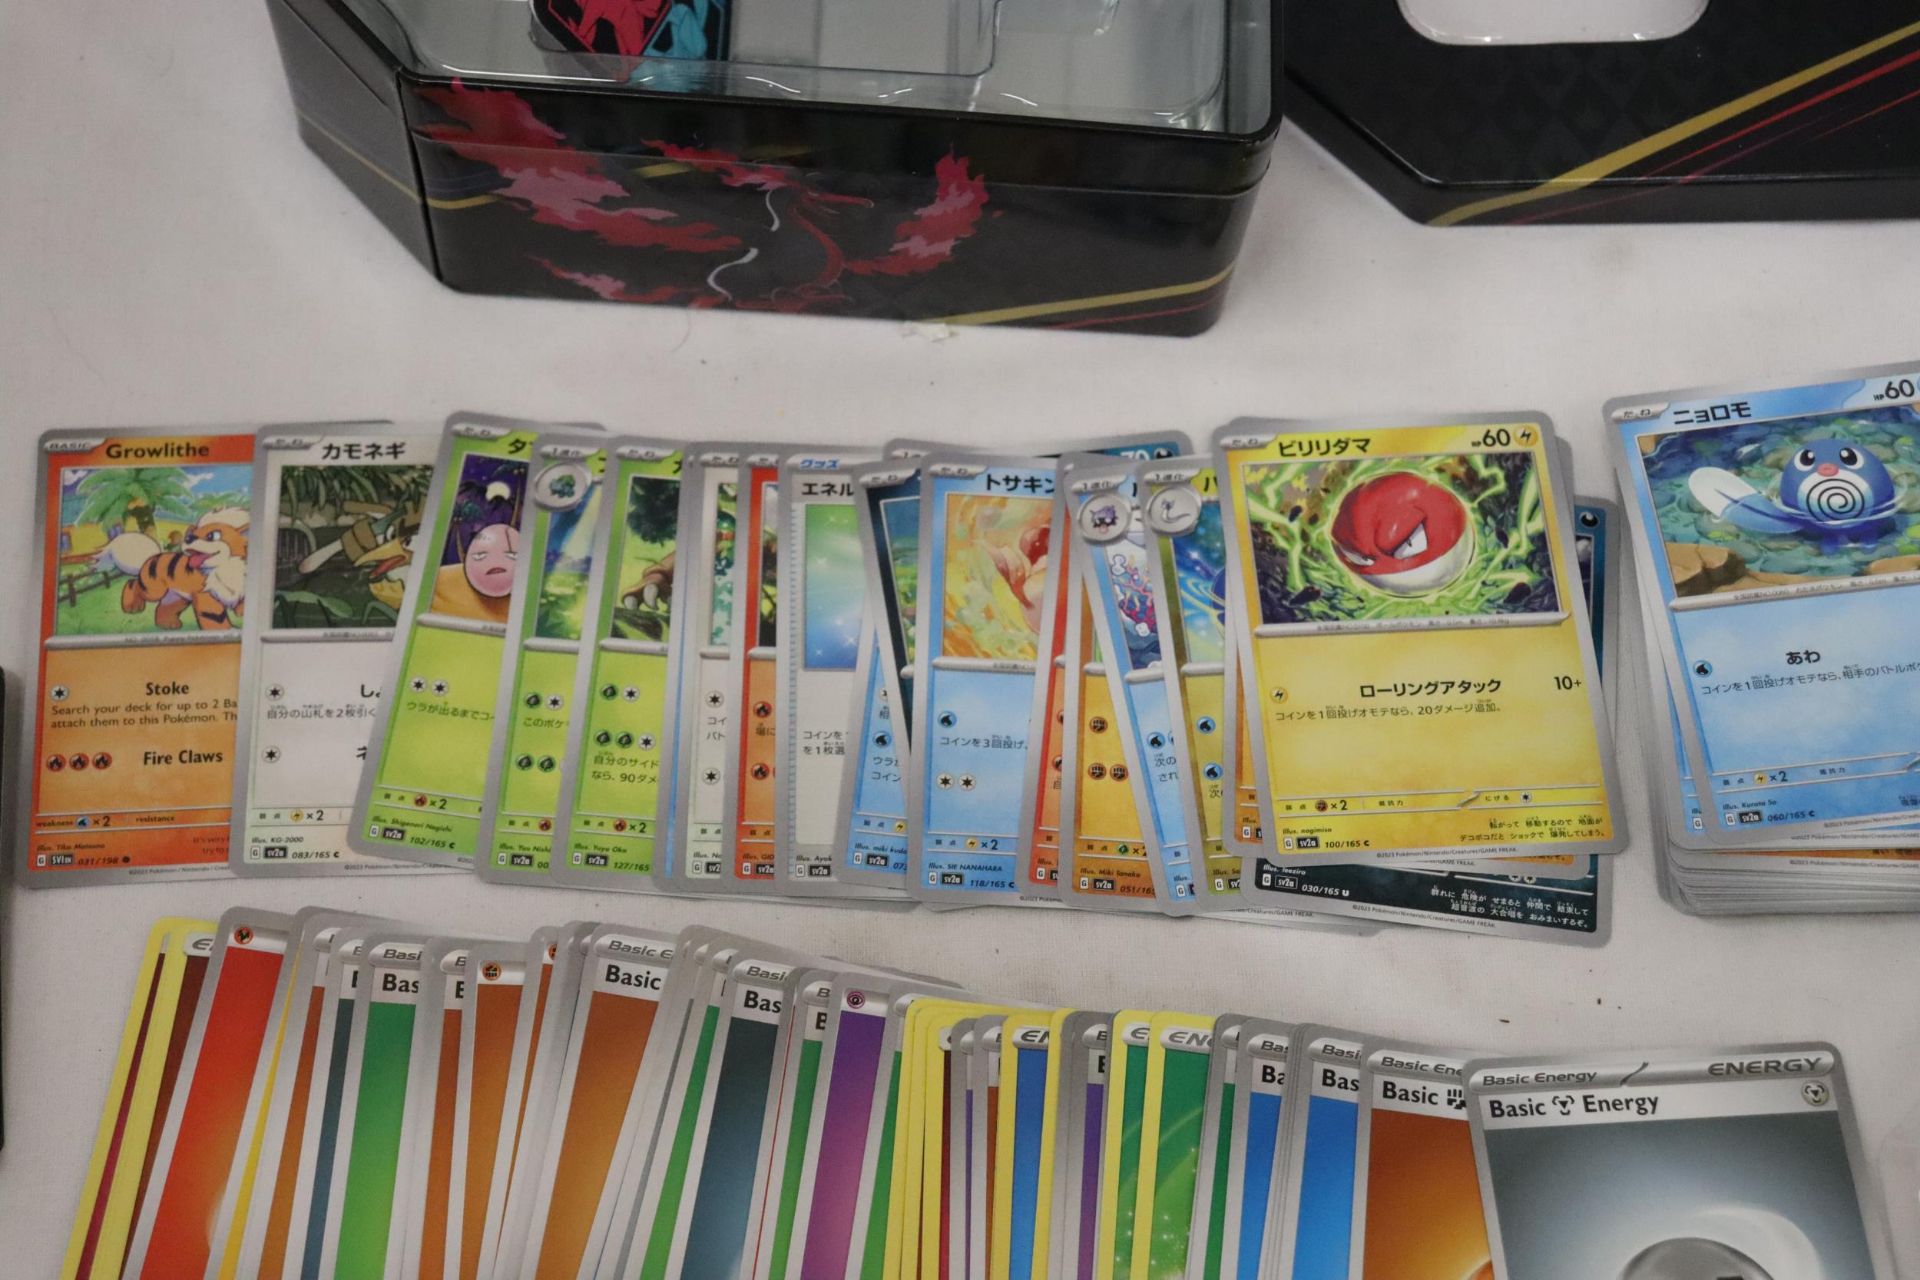 A POKEMON COLLECTOR'S TIN FULL OF JAPANESE CARDS - Image 4 of 8